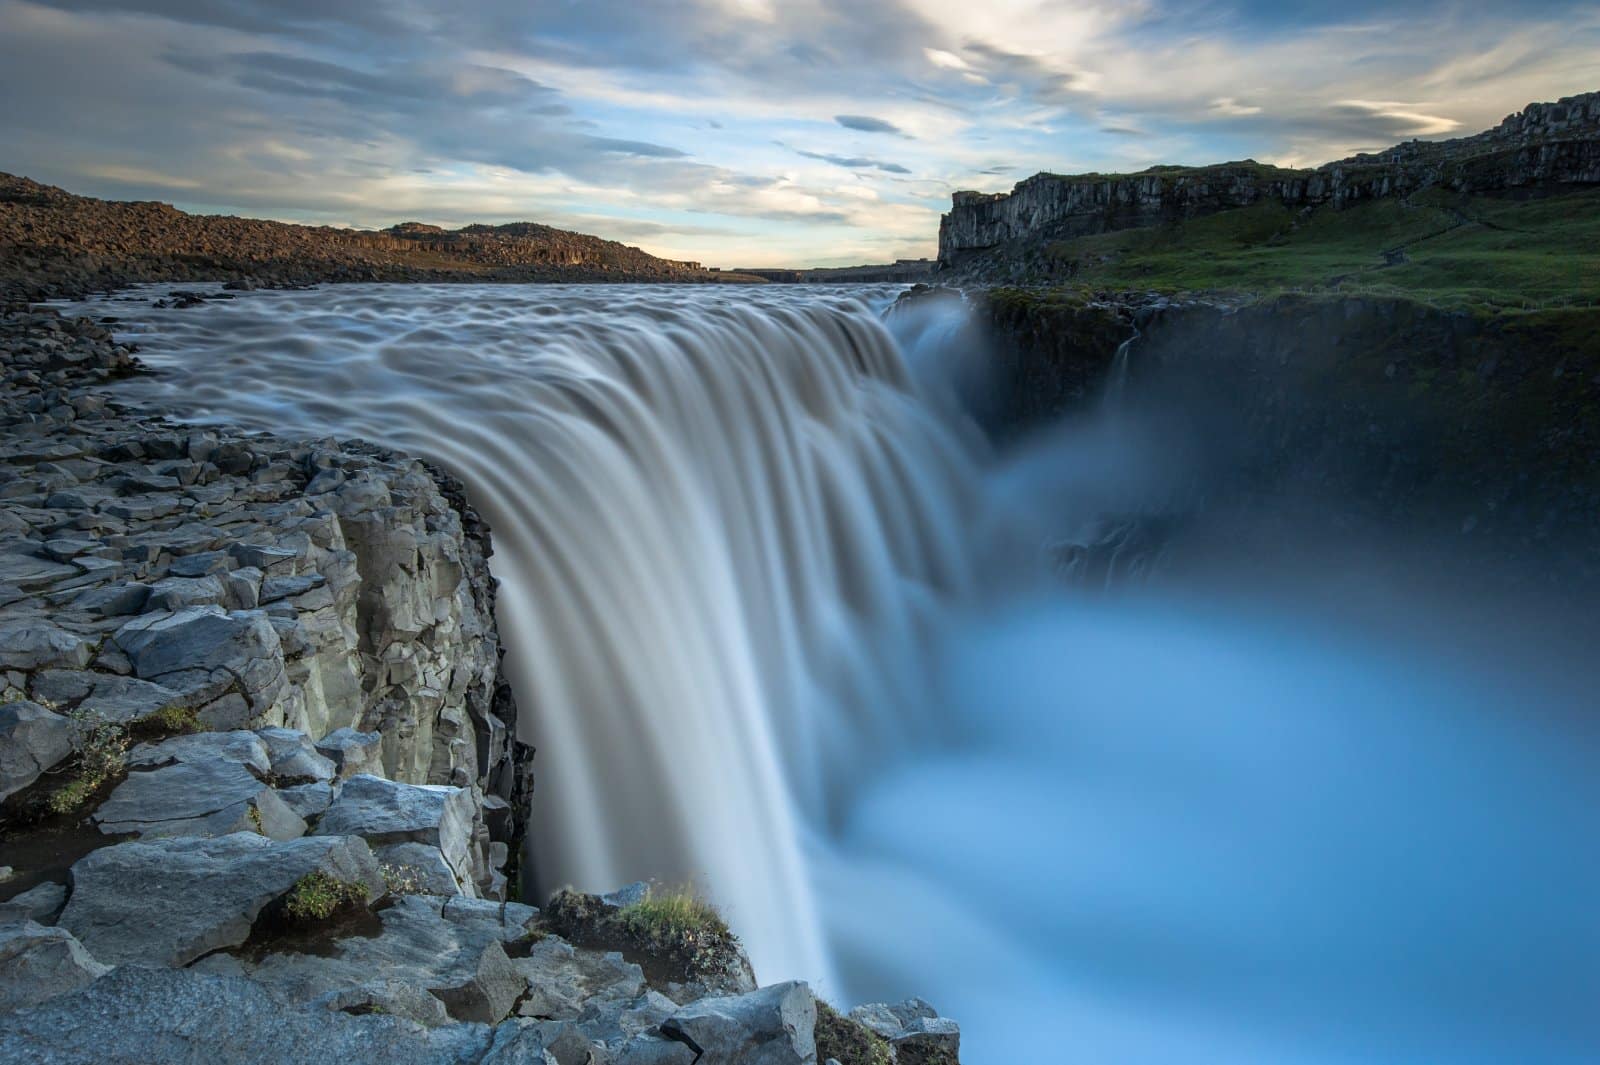 <p class="wp-caption-text">Image Credit: Shutterstock / Thomas Lusth</p>  <p><span>Dettifoss, located in Vatnajökull National Park in Northeast Iceland, is reputed to be the most powerful waterfall in Europe. The waterfall’s sheer force and the volume of water cascading down into the Jökulsárgljúfur canyon make it a breathtaking sight. The surrounding landscape, characterized by rugged terrain and the stark beauty of the Icelandic highlands, adds to the waterfall’s dramatic appeal.</span></p>